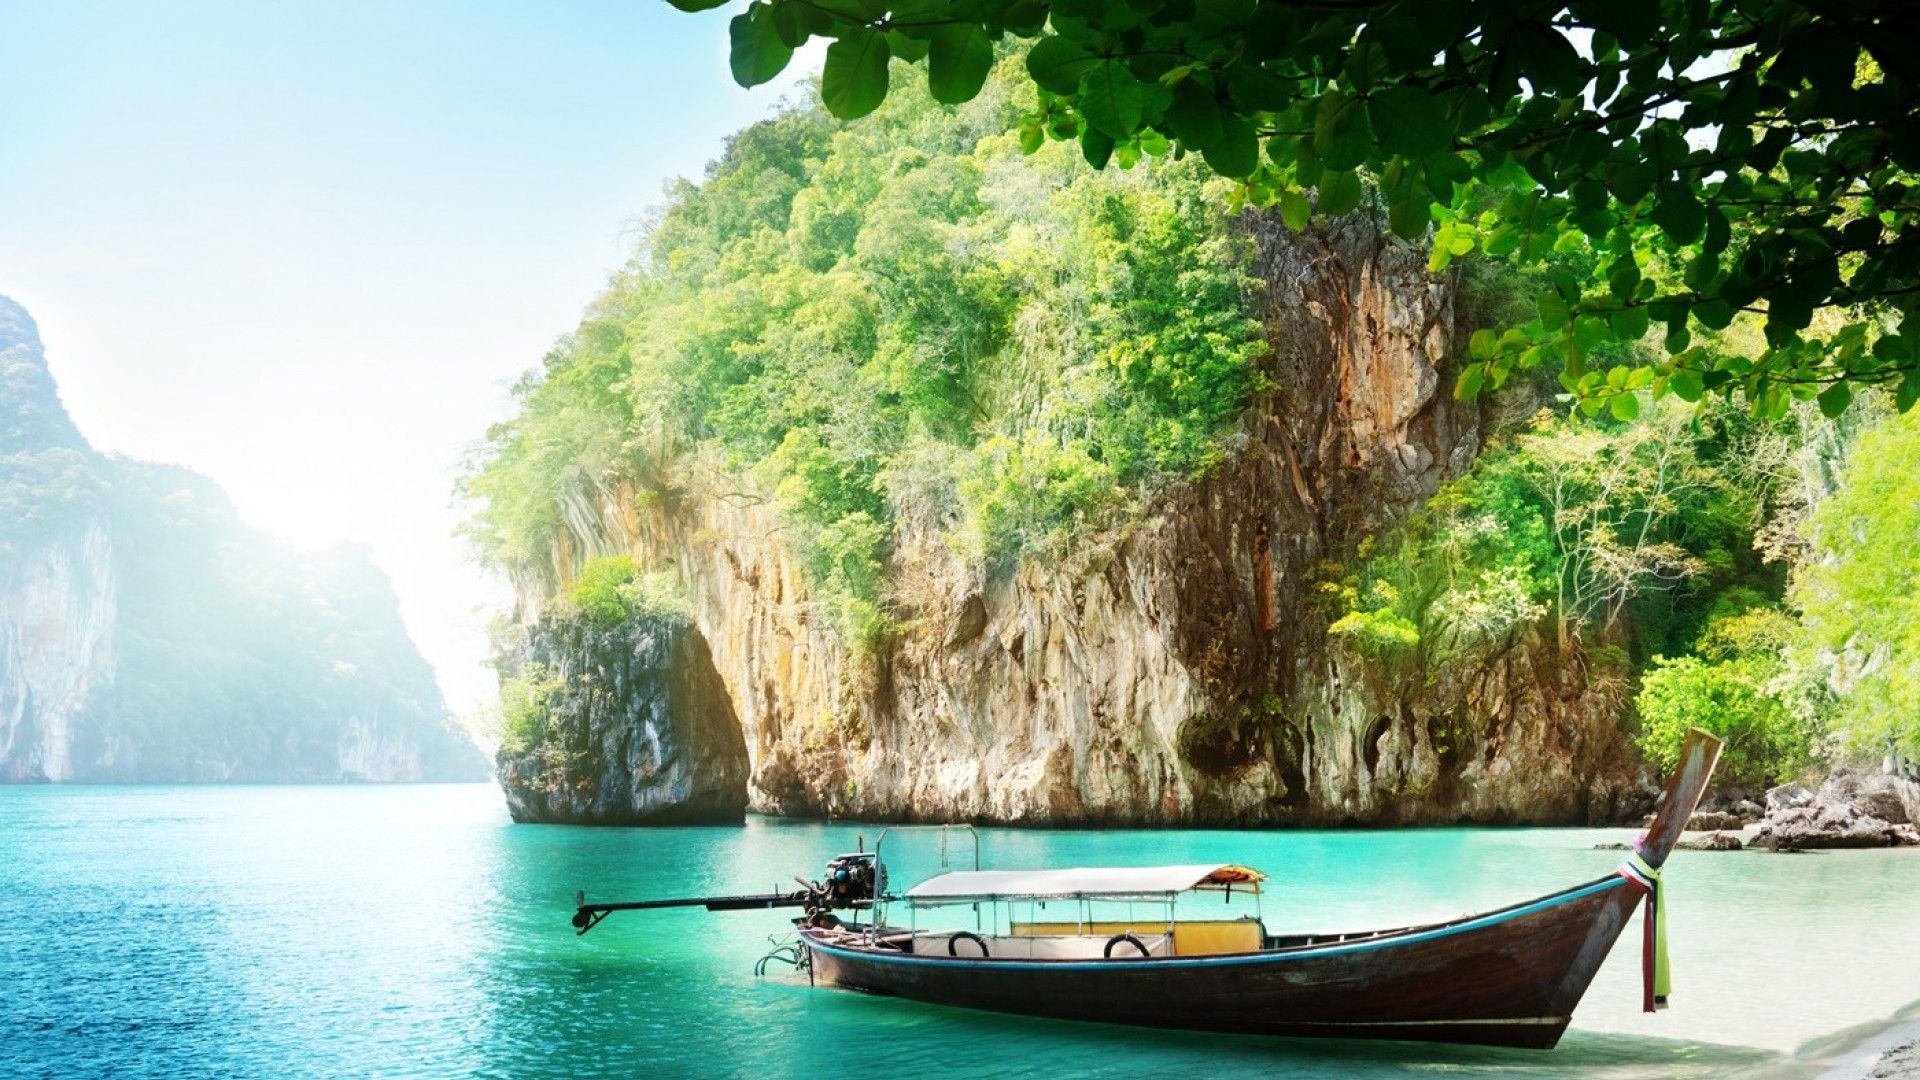 Beautiful Nature Thailand Pictures